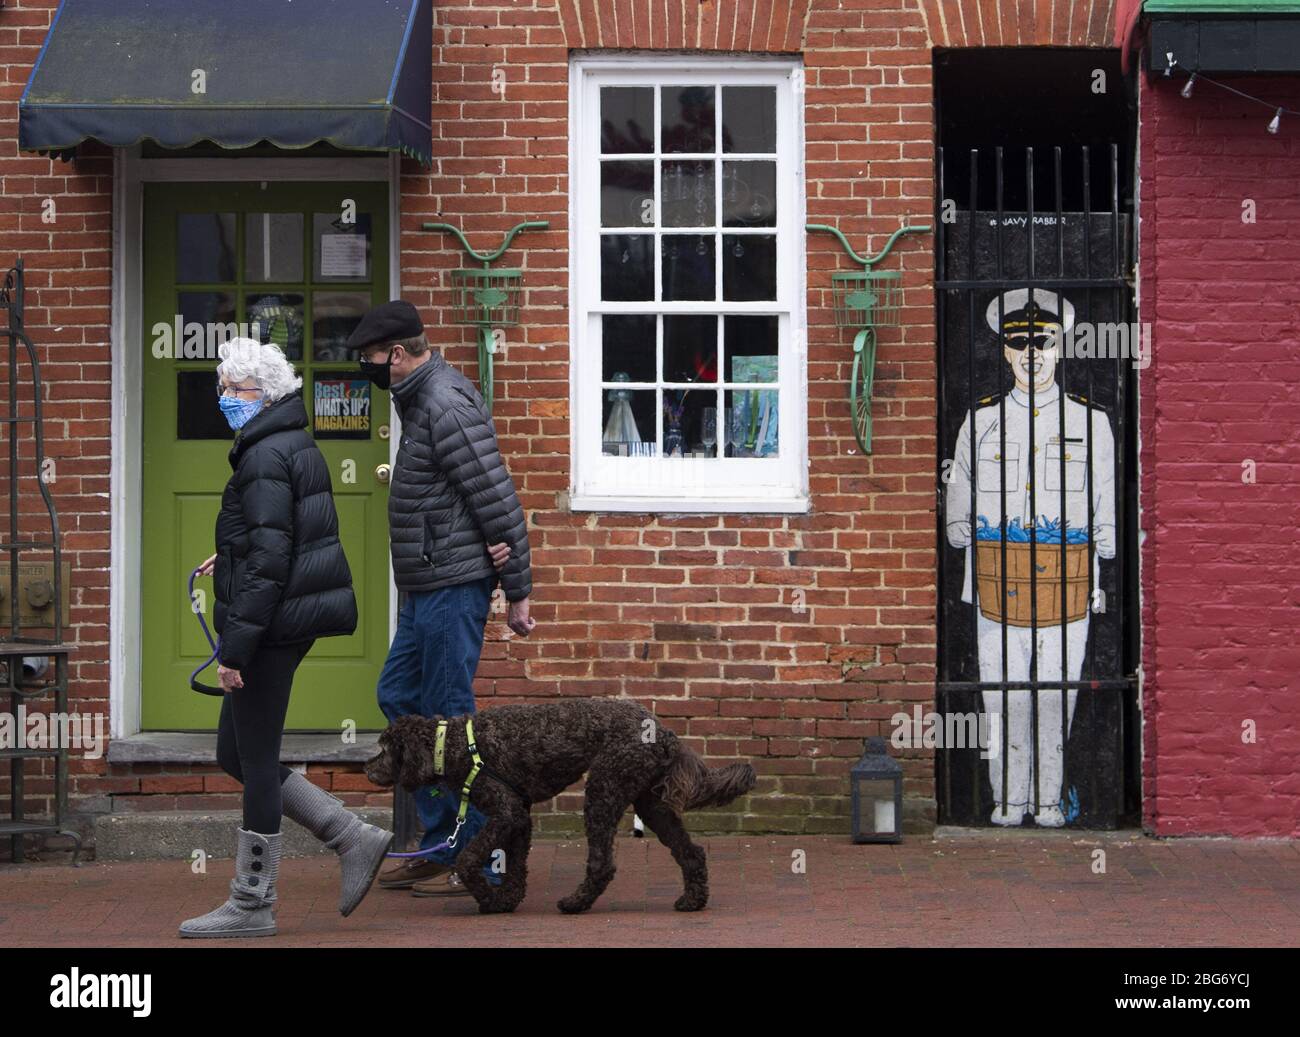 Annapolis, United States. 20th Apr, 2020. People wear masks as they walk a dog on Main Street in downtown Annapolis, Maryland amid the Coronavirus COVID-19 pandemic on Monday, April 20, 2020. Gov. Larry Hogan, R-MD, recently passed an order that requires all people must wear a face covering before going into any retail establishment.  Photo by Kevin Dietsch/UPI Stock Photo